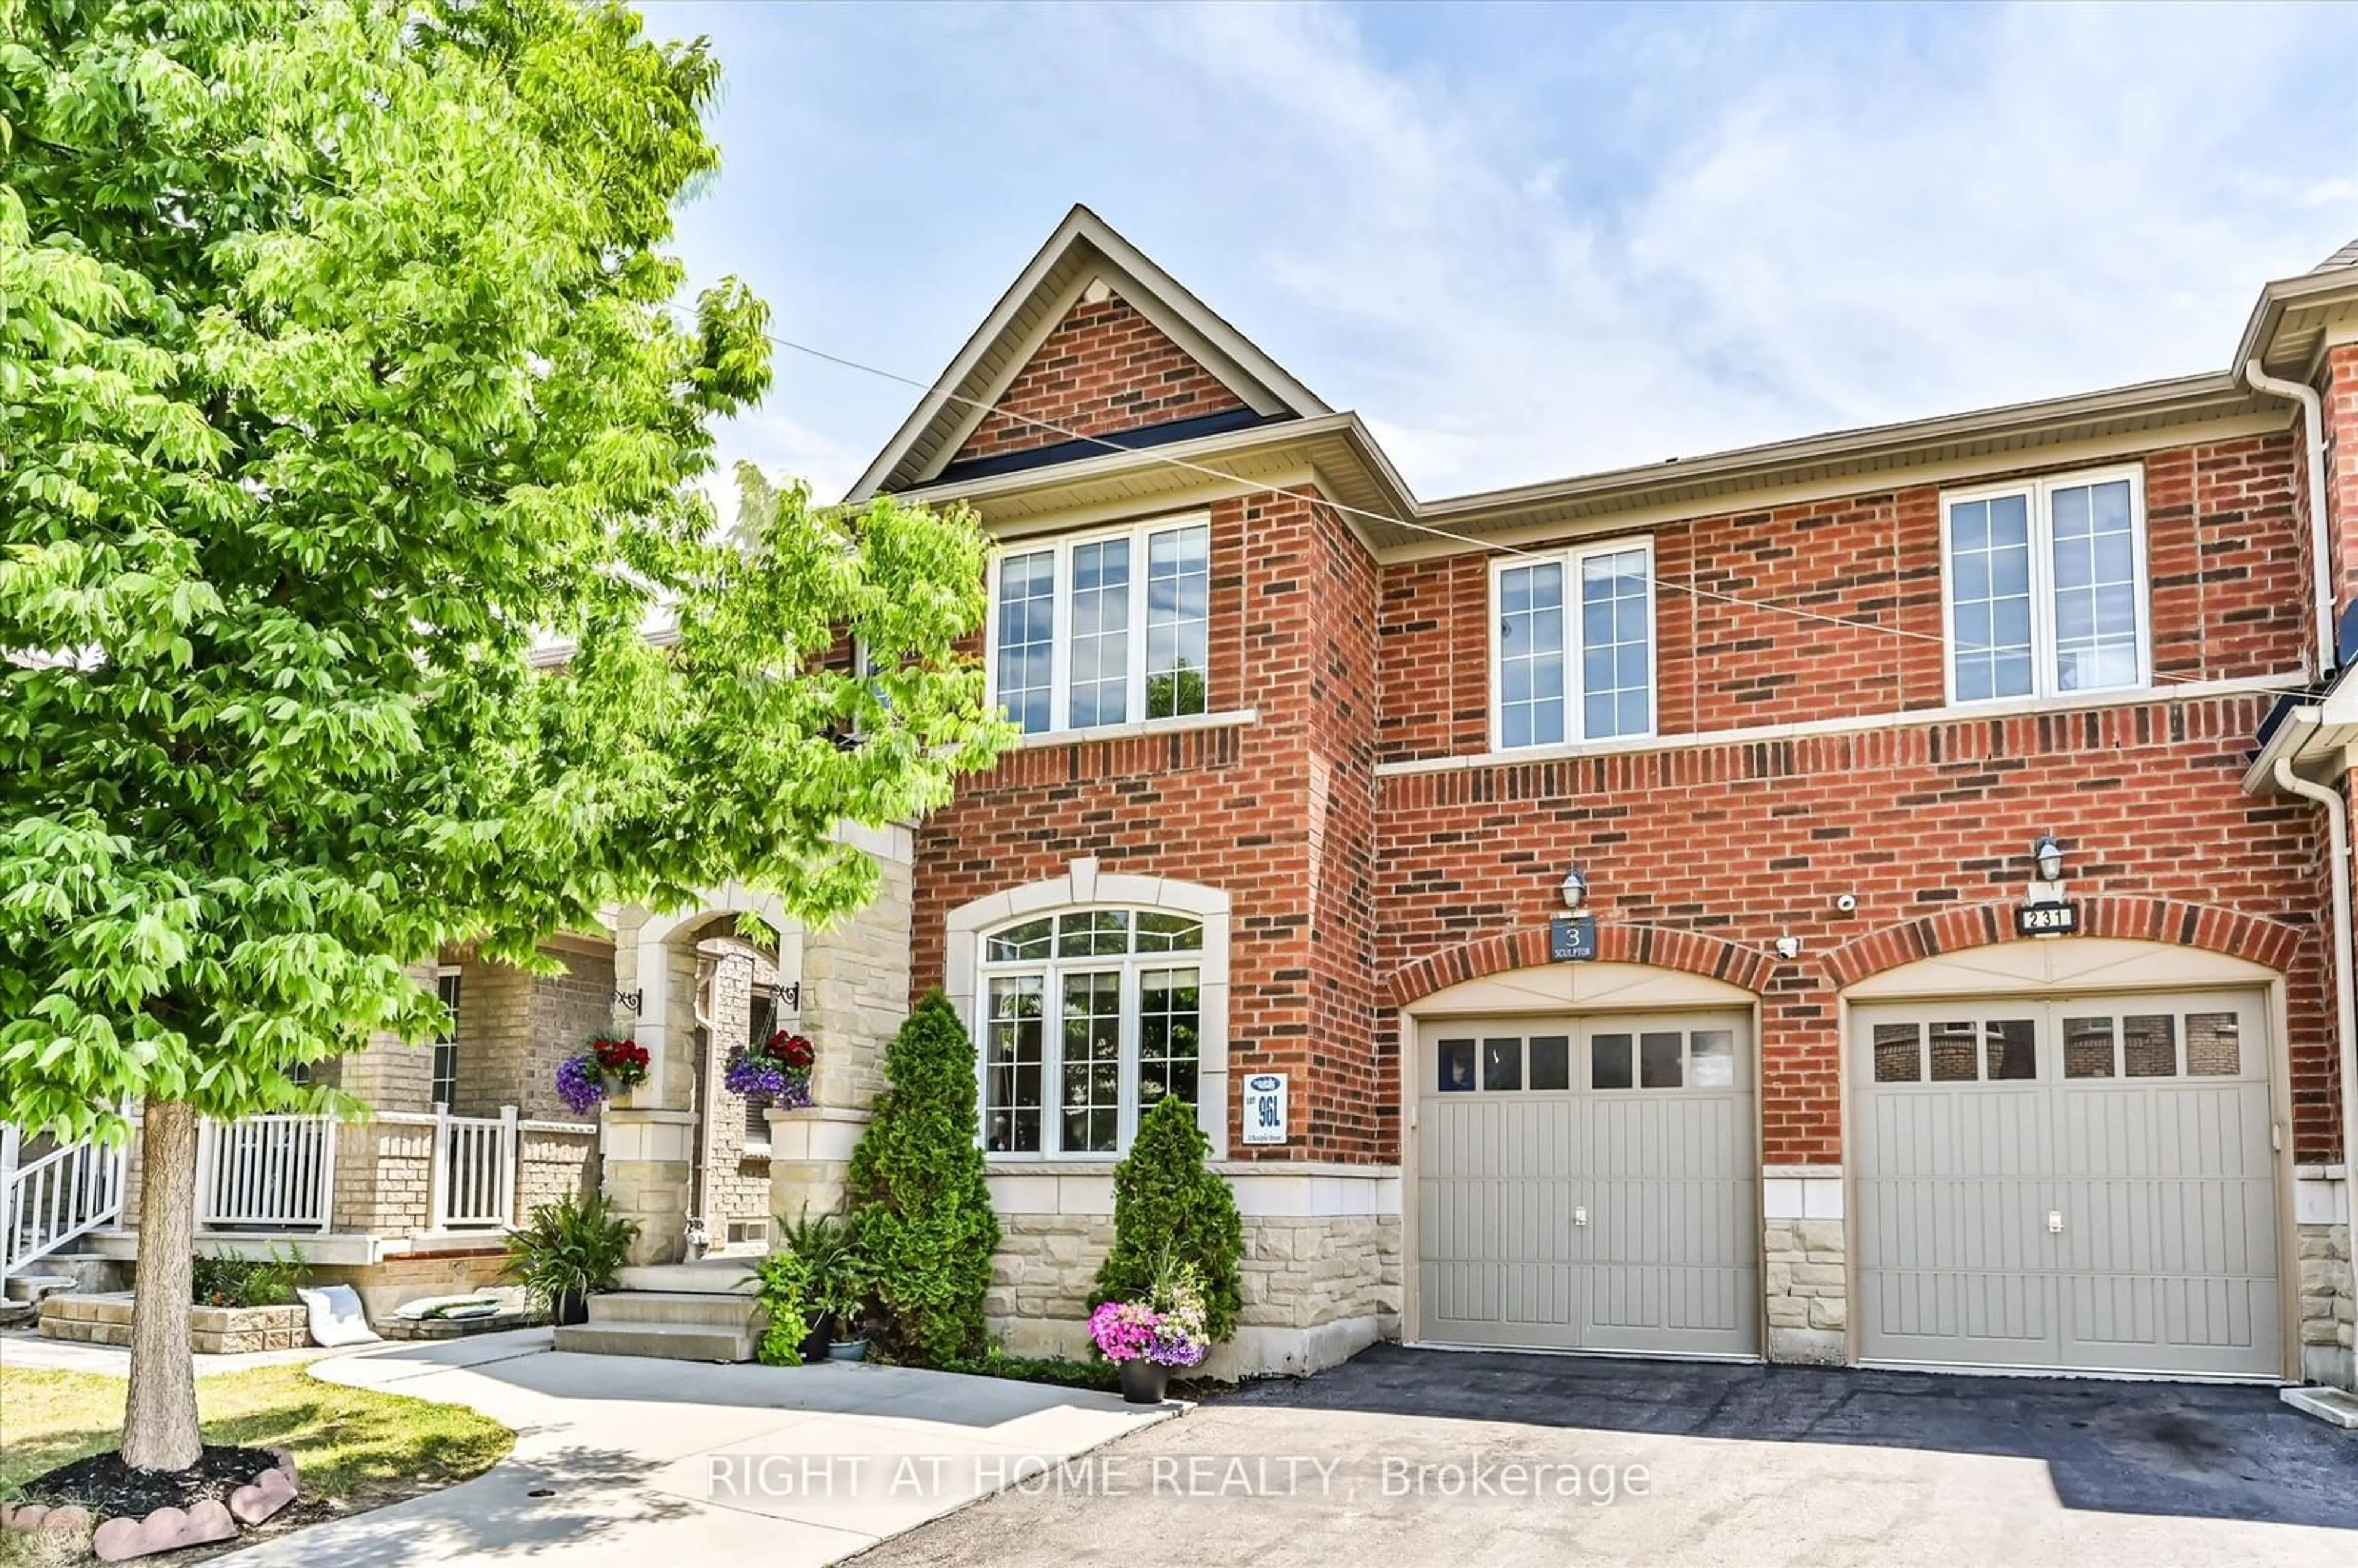 Home with brick exterior material for 3 Sculptor St, Brampton Ontario L6P 3H6